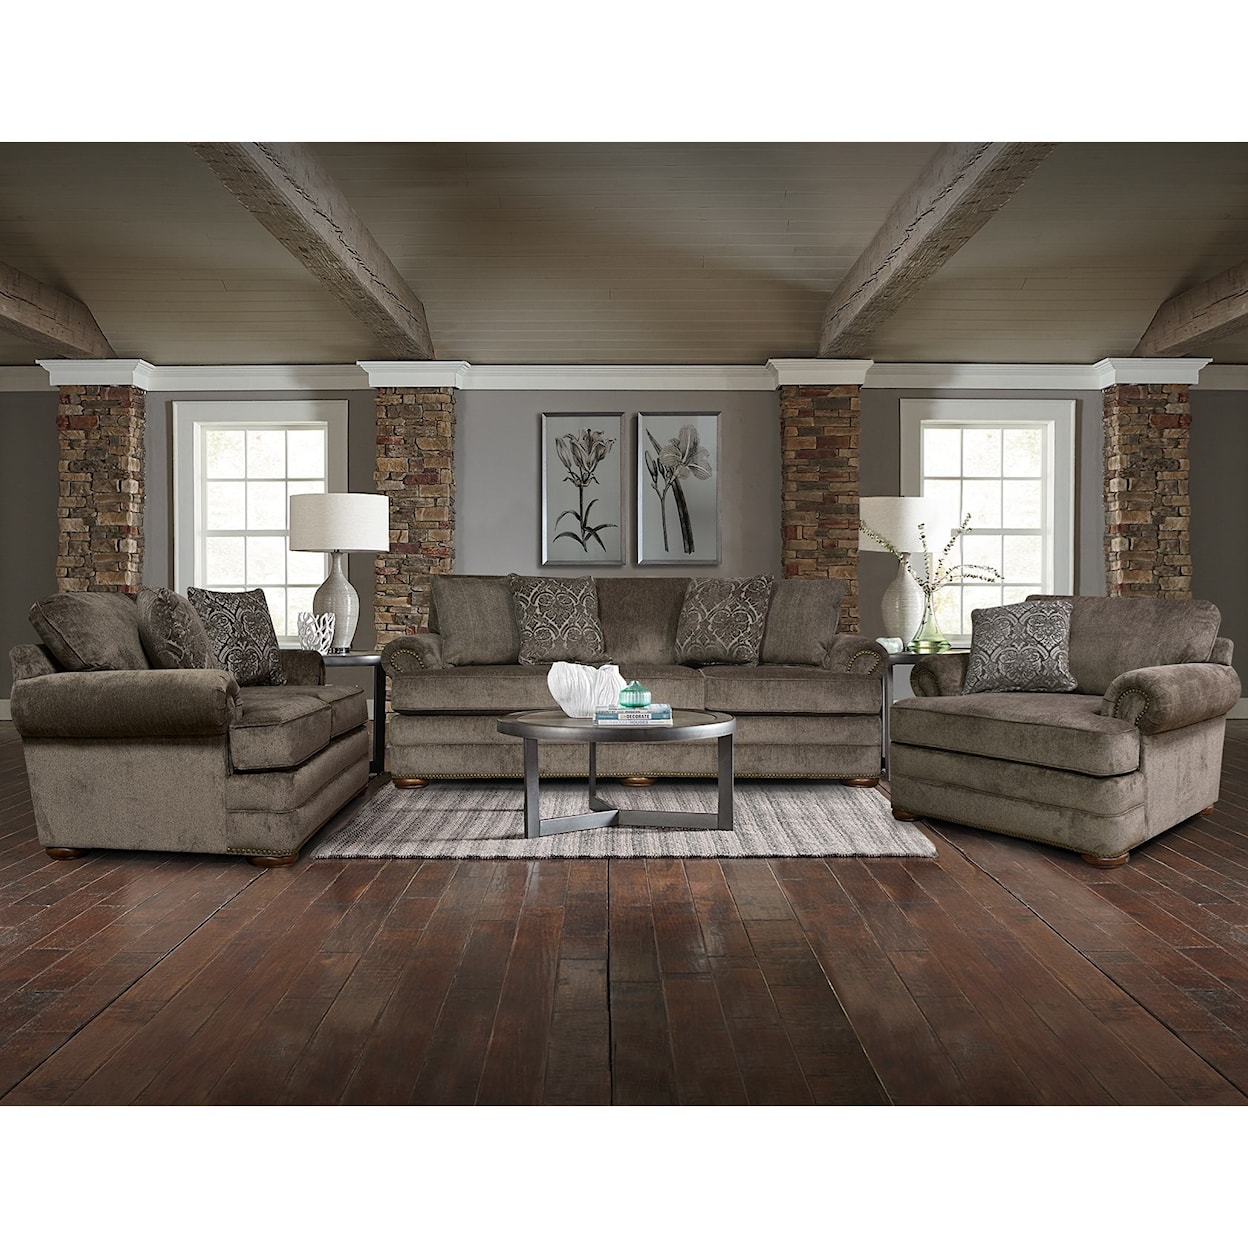 Dimensions 6M00/N Series Stationary Living Room Group